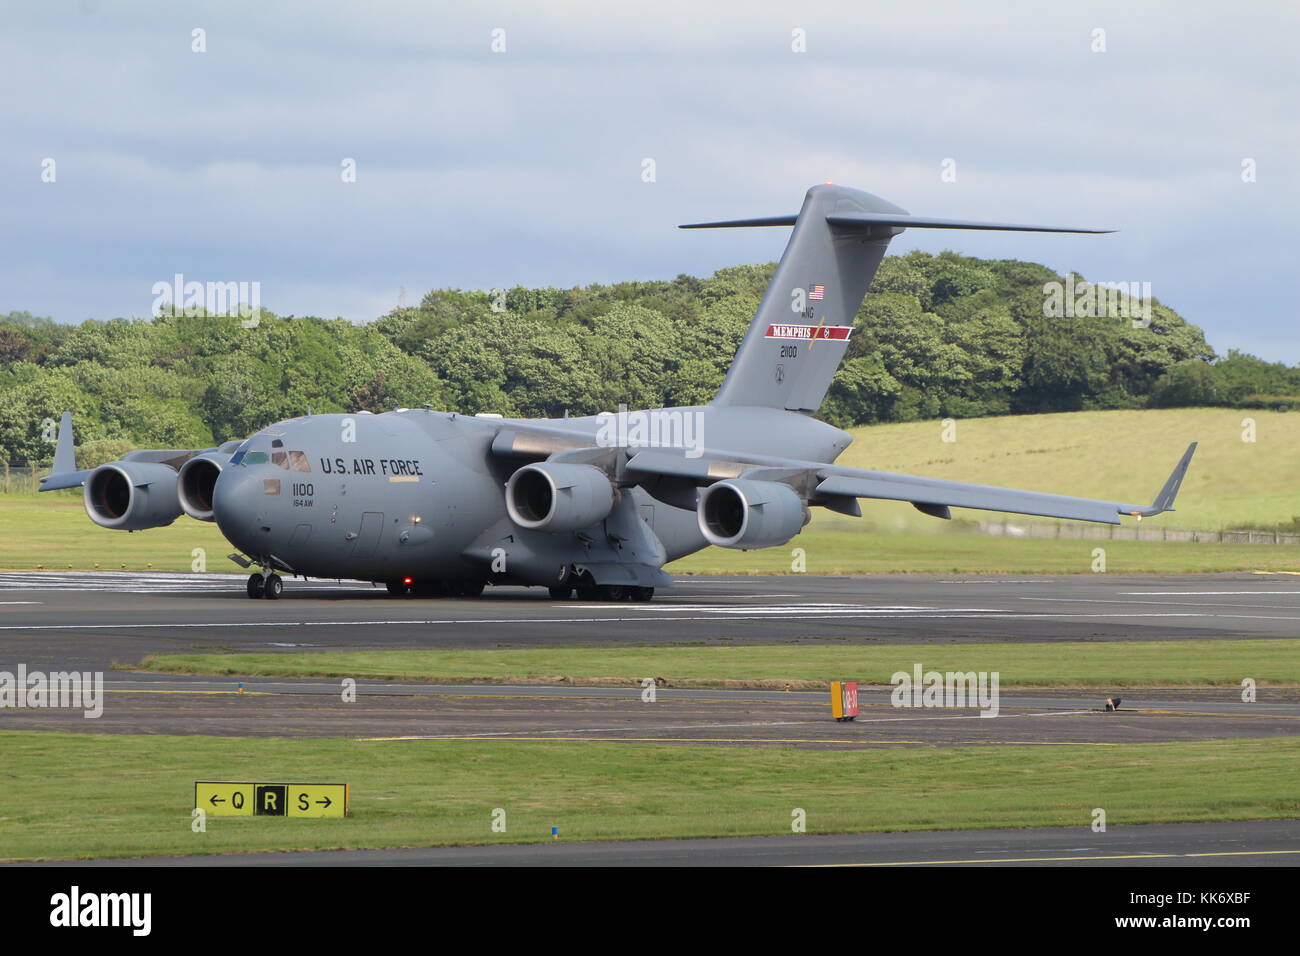 02-1100, a Boeing C-17A Globemaster III operated by the United States Air Force's 164th Airlift Wing, at Prestwick Airport in Ayrshire. Stock Photo